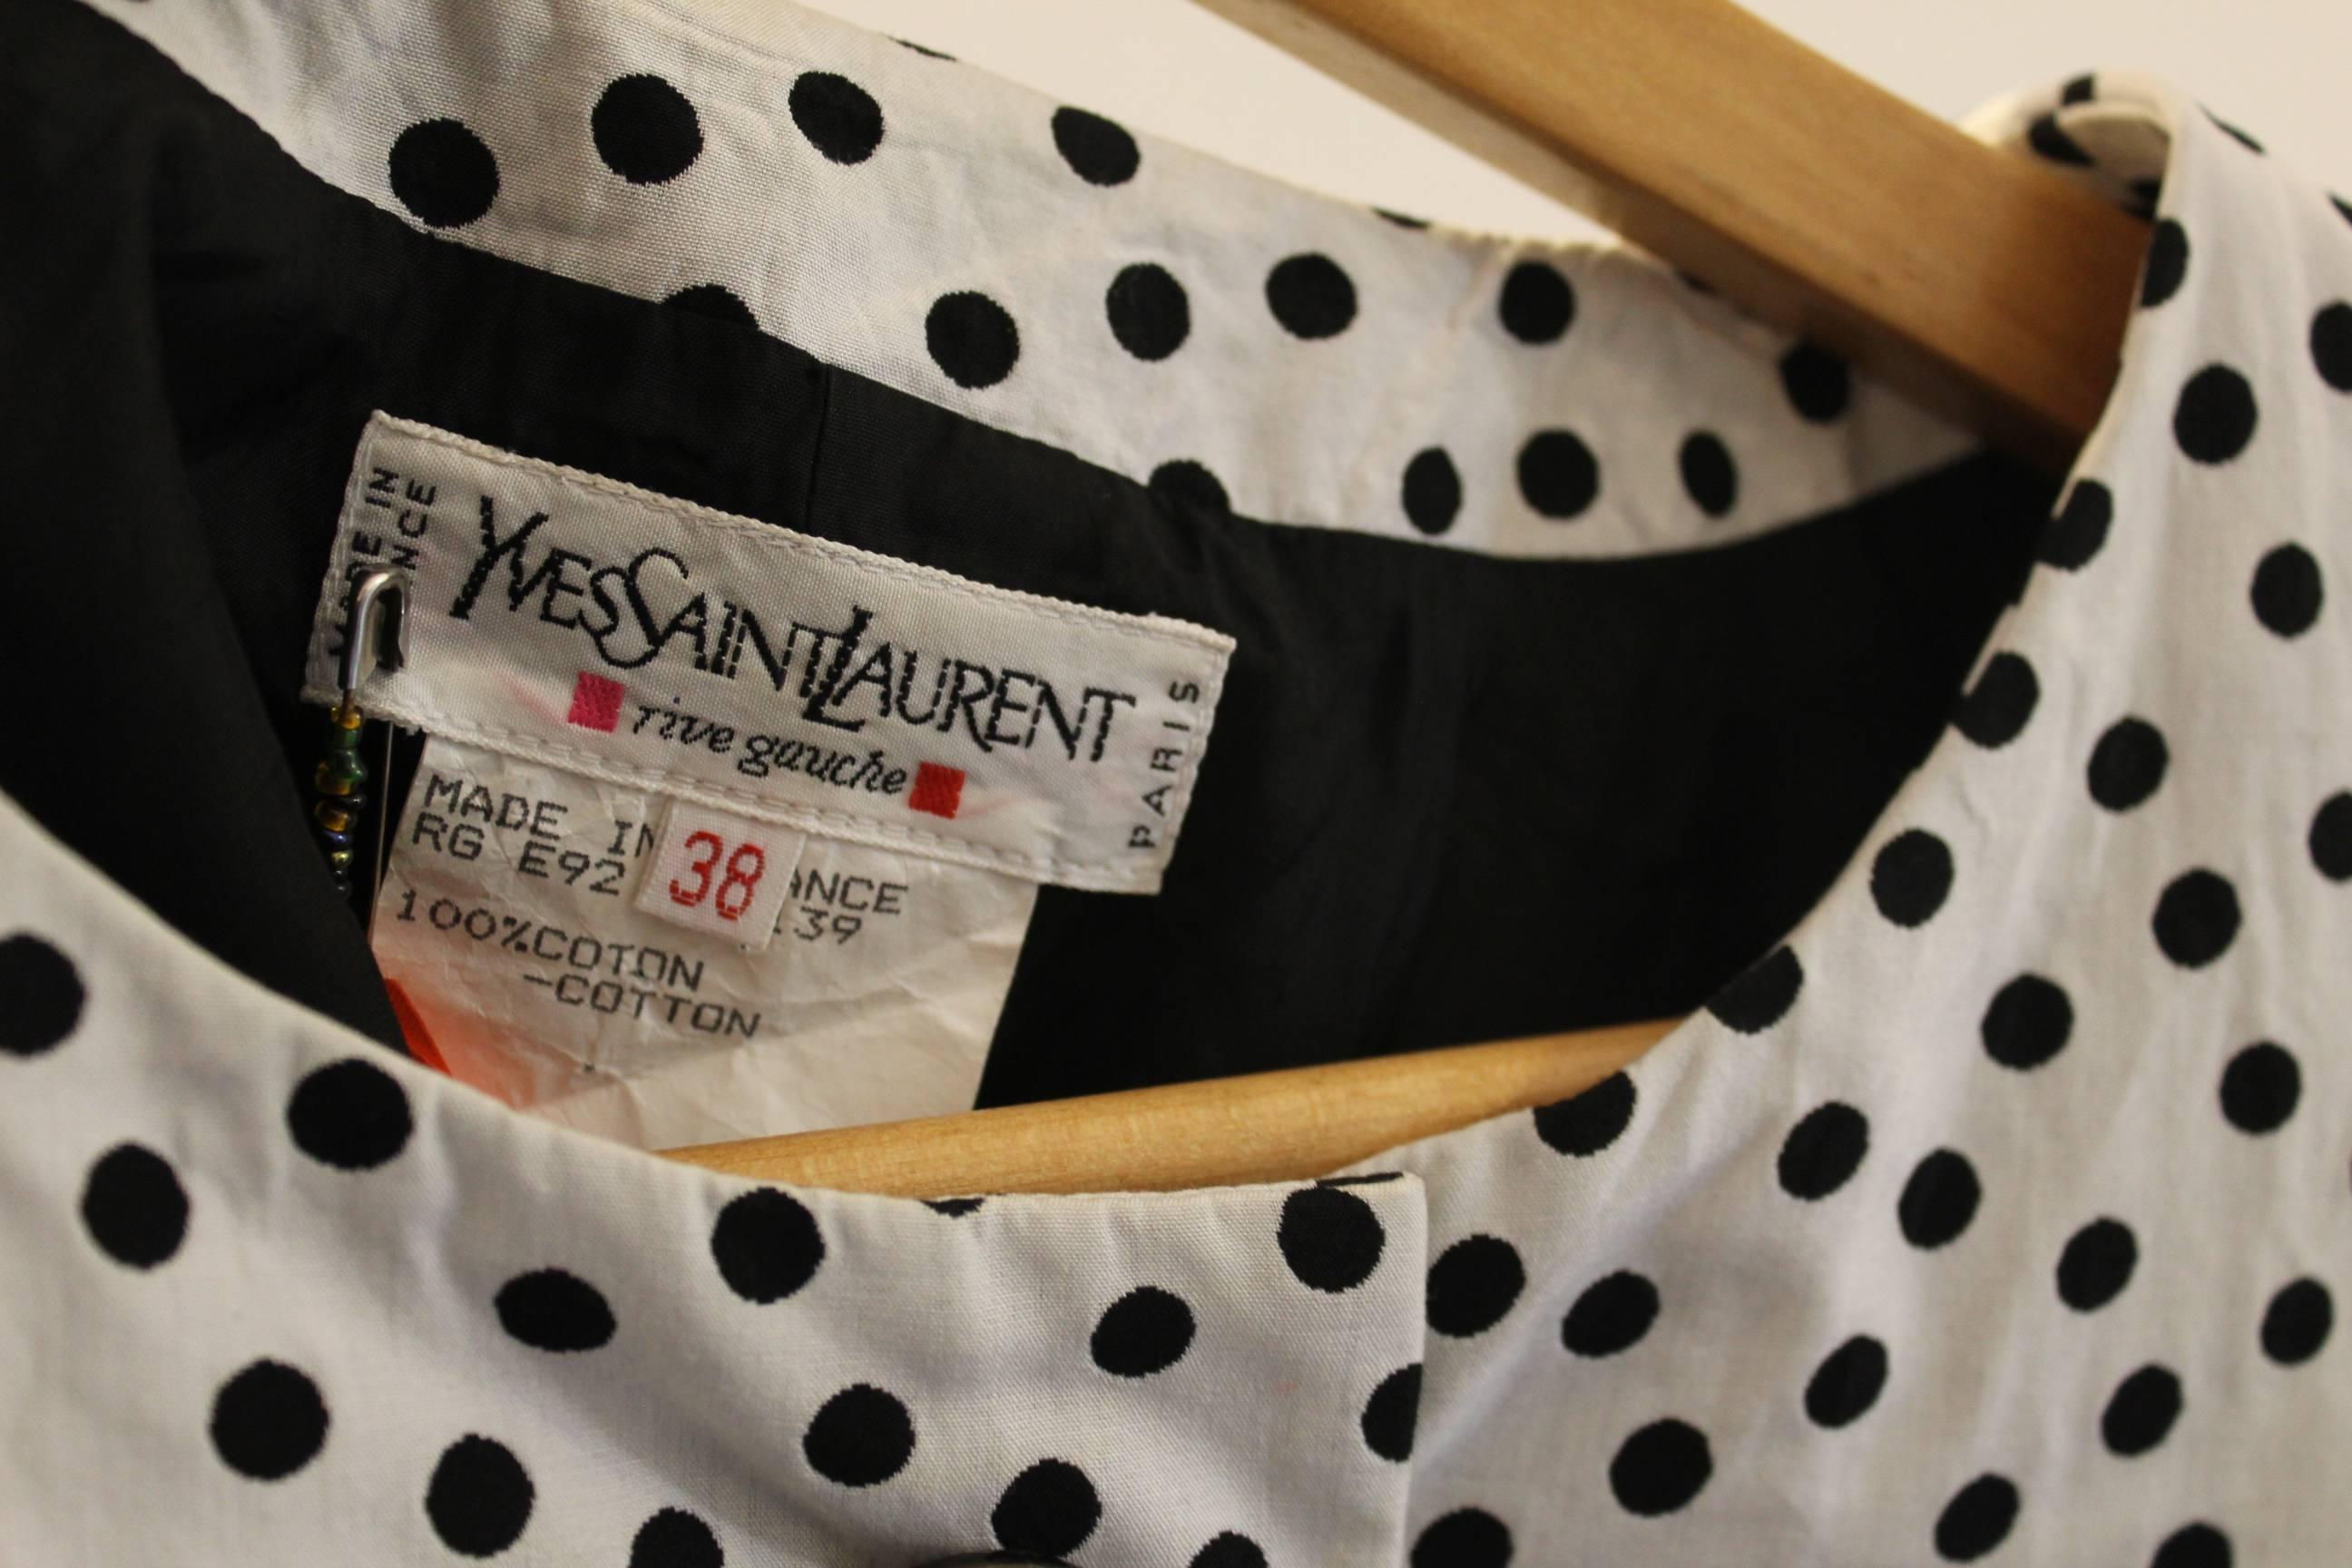 Nice black and white bolero with dots from Yves Saint Laurent.
Size european 38